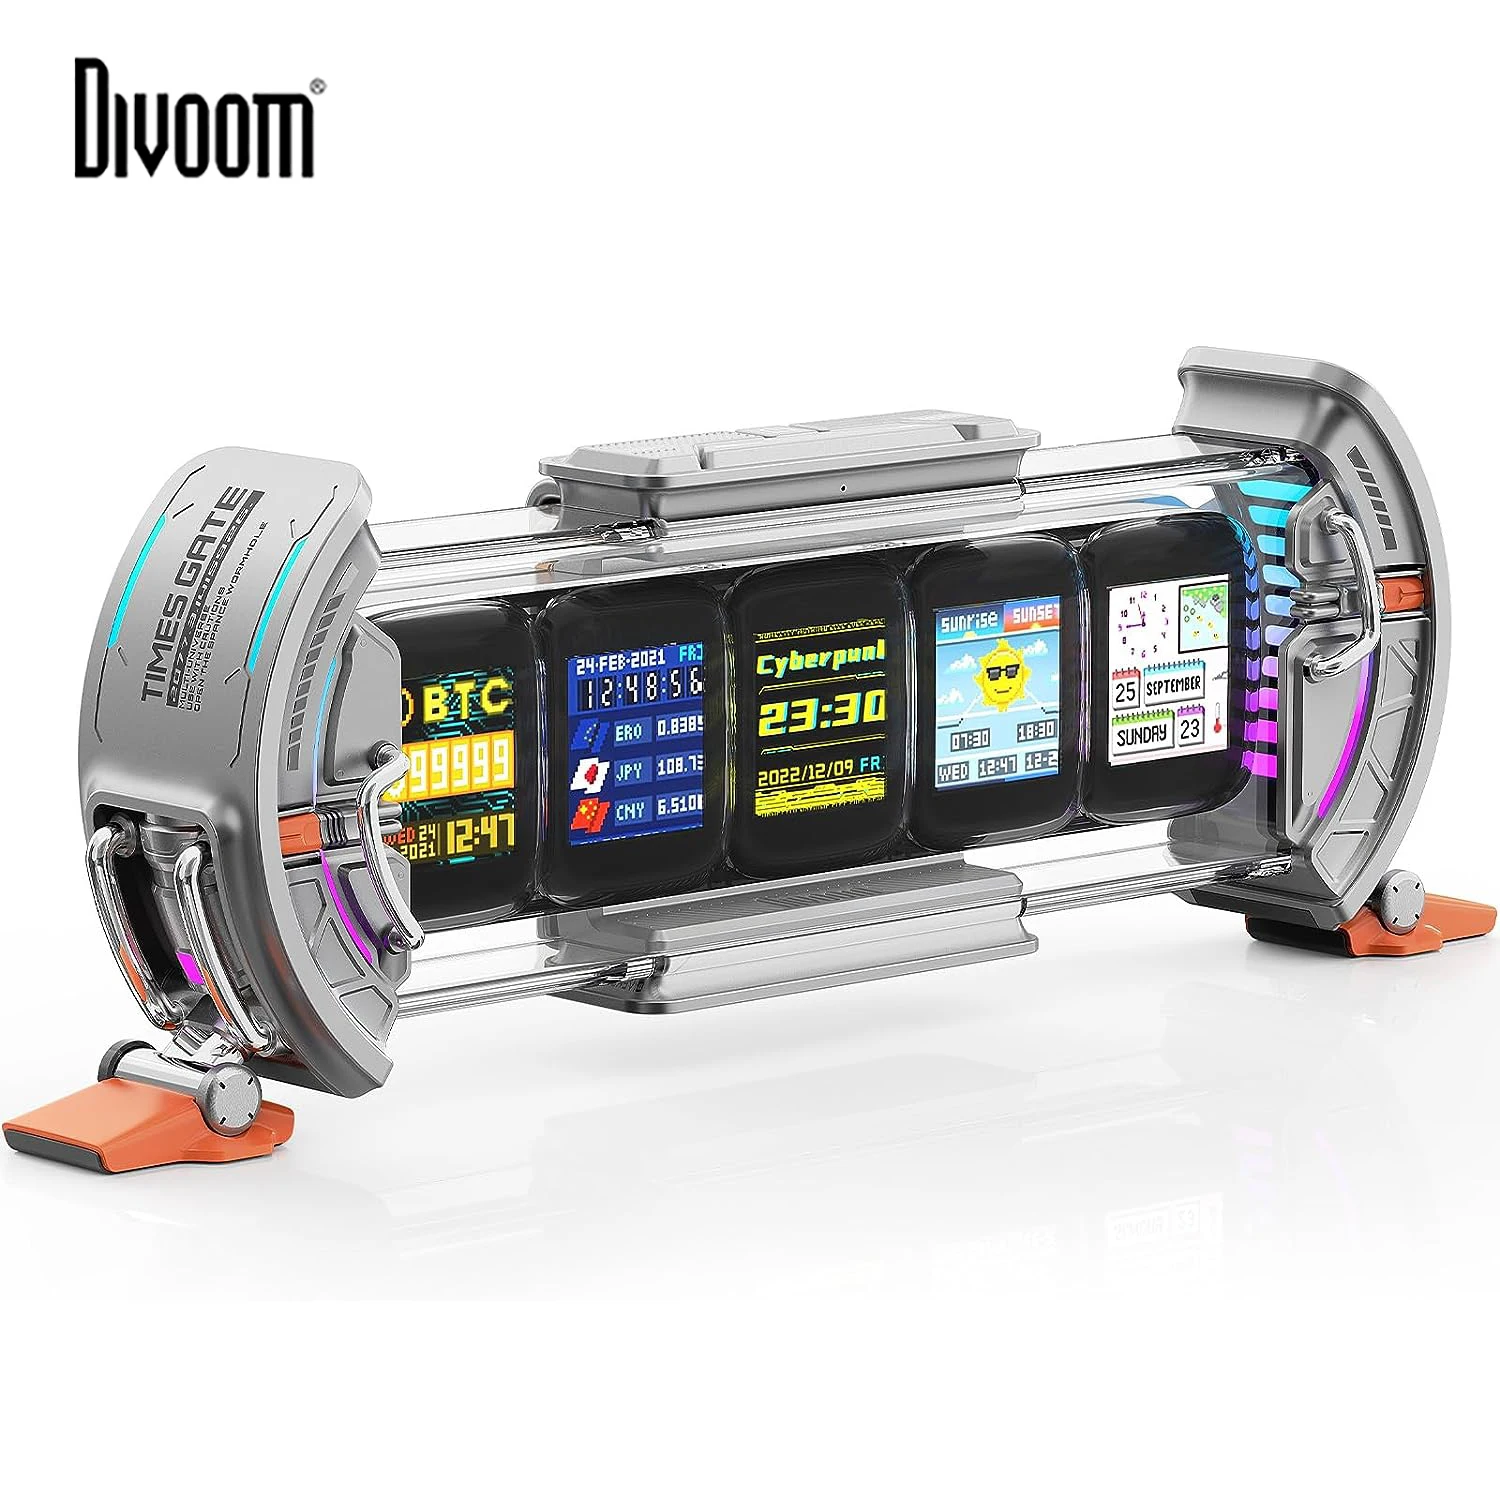 Divoom-times-gate-gaming-room-setup-digital-clock-with-smart-app-control-wifi-connect-rgb-led